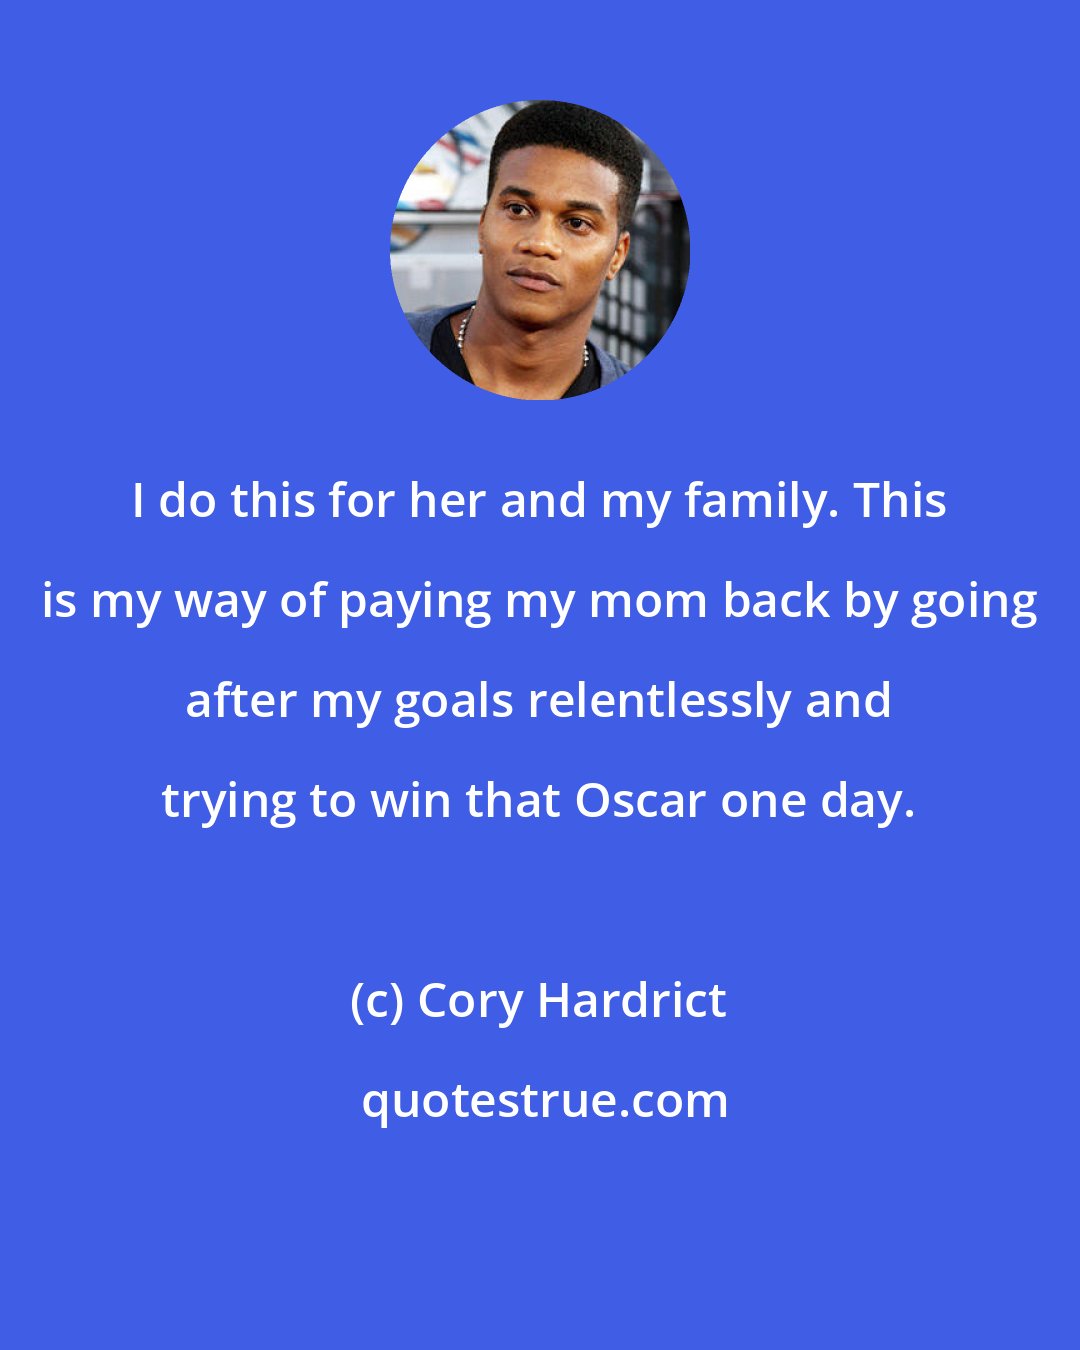 Cory Hardrict: I do this for her and my family. This is my way of paying my mom back by going after my goals relentlessly and trying to win that Oscar one day.